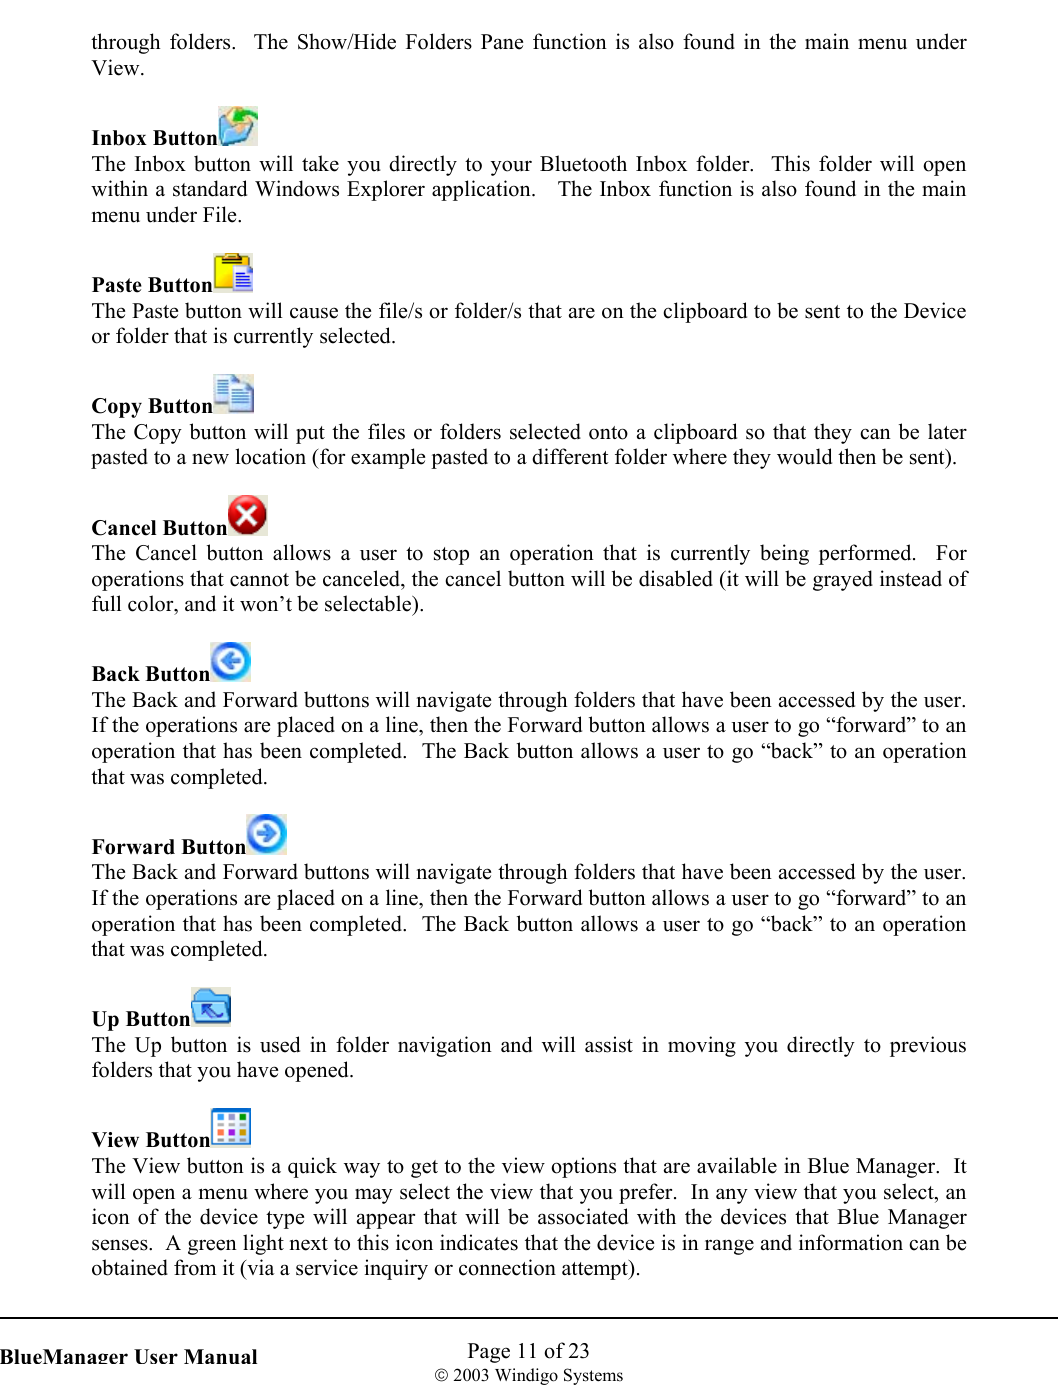    Page 11 of 23  2003 Windigo Systems   BlueManager User Manualthrough folders.  The Show/Hide Folders Pane function is also found in the main menu under View.  Inbox Button  The Inbox button will take you directly to your Bluetooth Inbox folder.  This folder will open within a standard Windows Explorer application.   The Inbox function is also found in the main menu under File.  Paste Button  The Paste button will cause the file/s or folder/s that are on the clipboard to be sent to the Device or folder that is currently selected.  Copy Button  The Copy button will put the files or folders selected onto a clipboard so that they can be later pasted to a new location (for example pasted to a different folder where they would then be sent).  Cancel Button  The Cancel button allows a user to stop an operation that is currently being performed.  For operations that cannot be canceled, the cancel button will be disabled (it will be grayed instead of full color, and it won’t be selectable).  Back Button  The Back and Forward buttons will navigate through folders that have been accessed by the user.  If the operations are placed on a line, then the Forward button allows a user to go “forward” to an operation that has been completed.  The Back button allows a user to go “back” to an operation that was completed.    Forward Button  The Back and Forward buttons will navigate through folders that have been accessed by the user.  If the operations are placed on a line, then the Forward button allows a user to go “forward” to an operation that has been completed.  The Back button allows a user to go “back” to an operation that was completed.  Up Button  The Up button is used in folder navigation and will assist in moving you directly to previous folders that you have opened.    View Button  The View button is a quick way to get to the view options that are available in Blue Manager.  It will open a menu where you may select the view that you prefer.  In any view that you select, an icon of the device type will appear that will be associated with the devices that Blue Manager senses.  A green light next to this icon indicates that the device is in range and information can be obtained from it (via a service inquiry or connection attempt).  